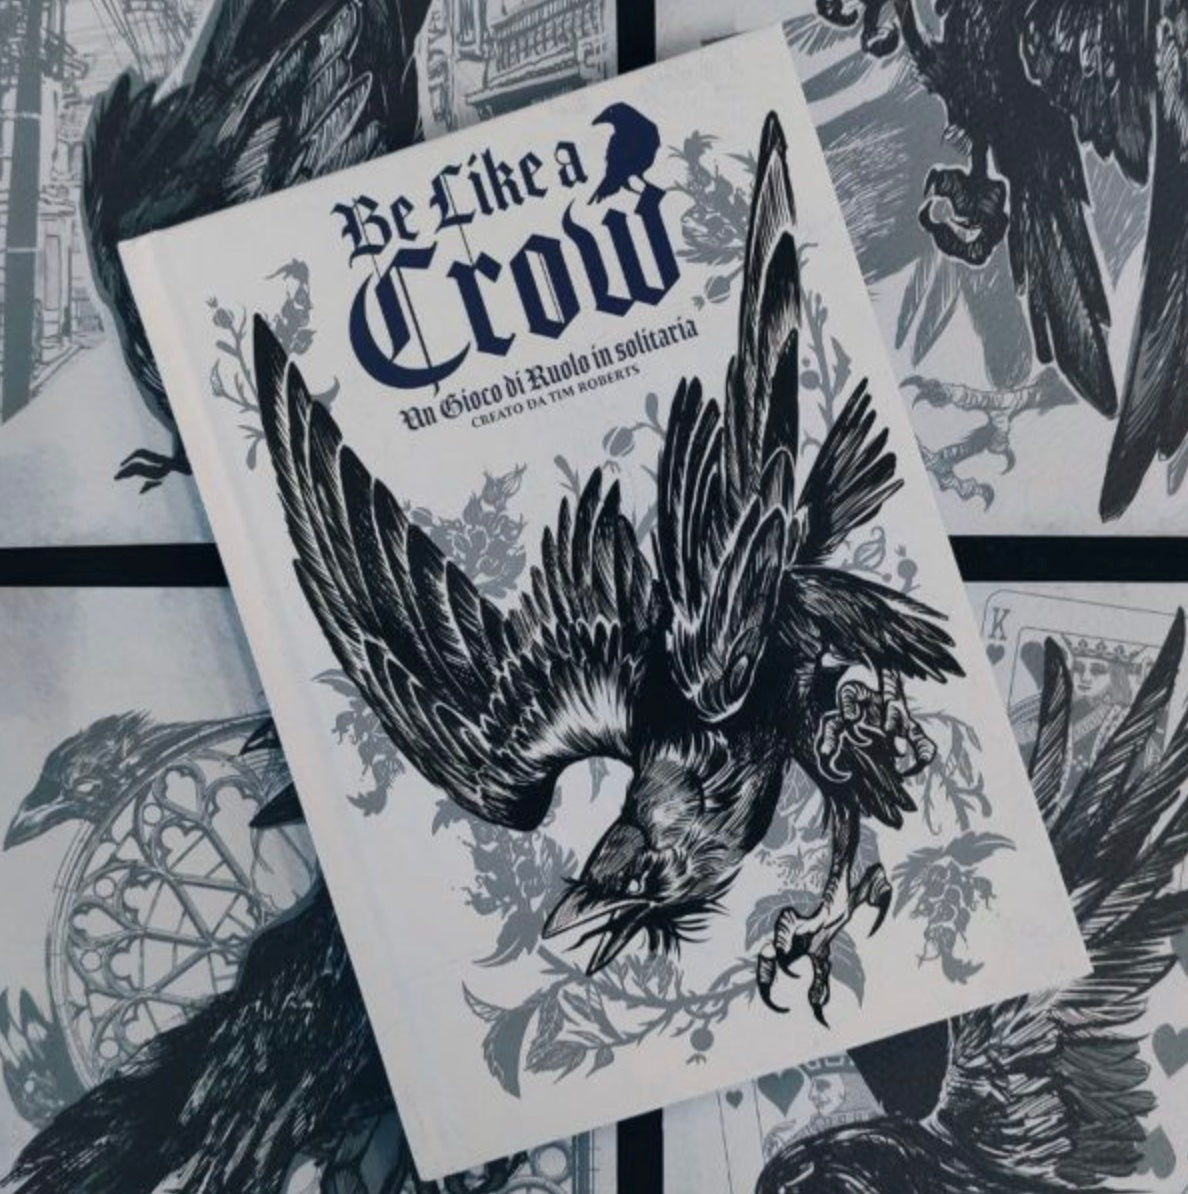 Italian language version of Be Like A Crow, a solo RPG translated by Mana Project.